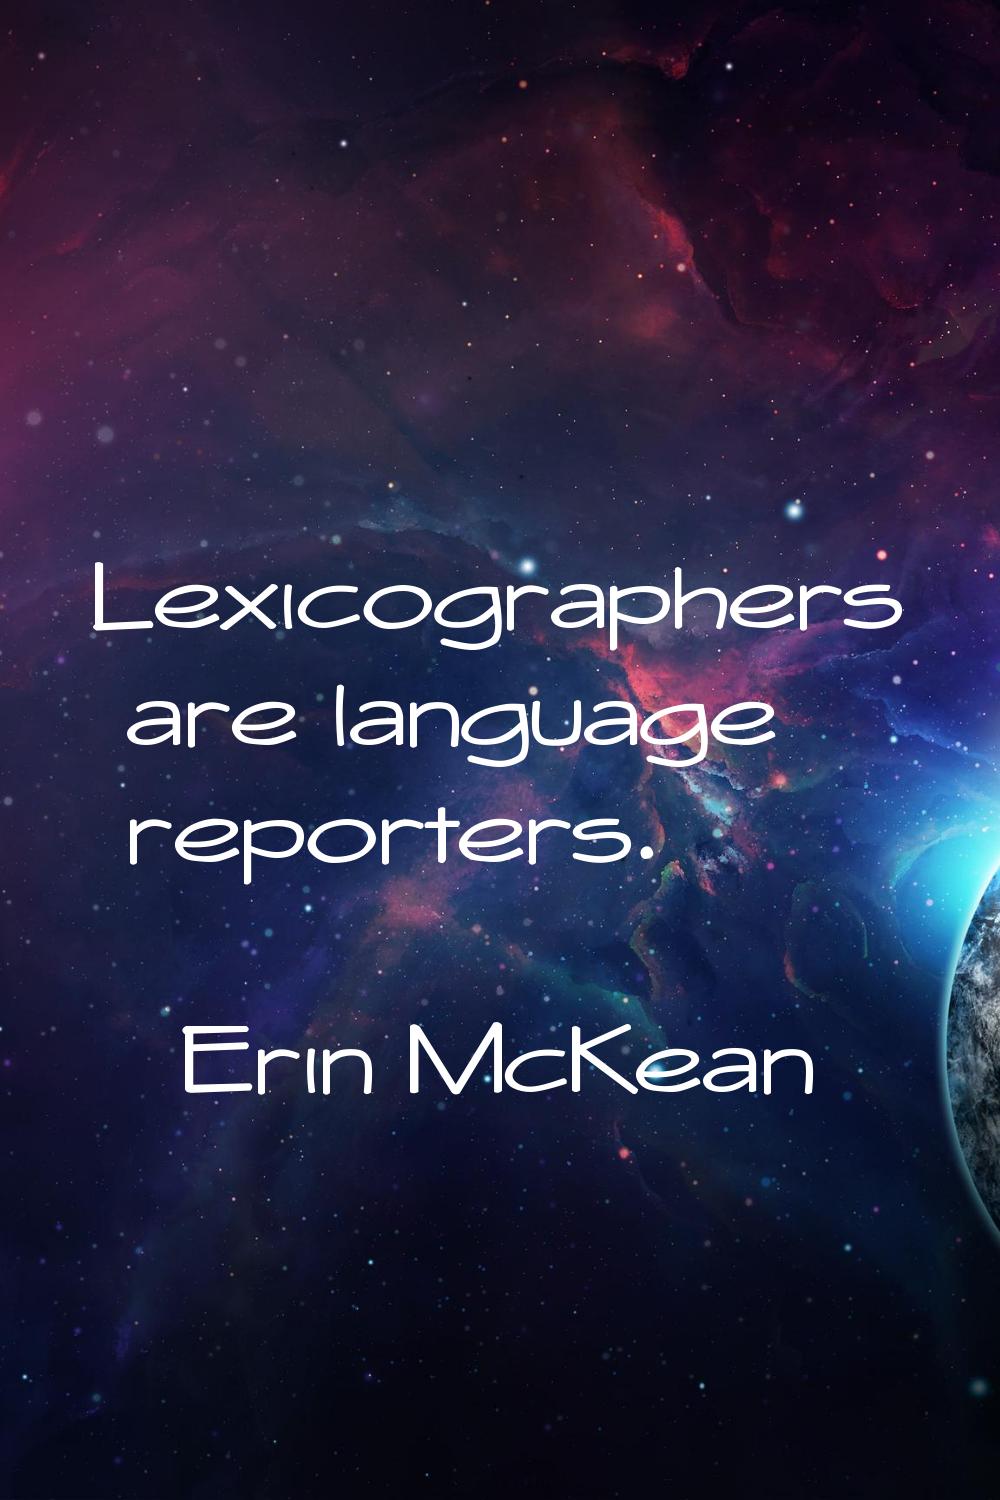 Lexicographers are language reporters.